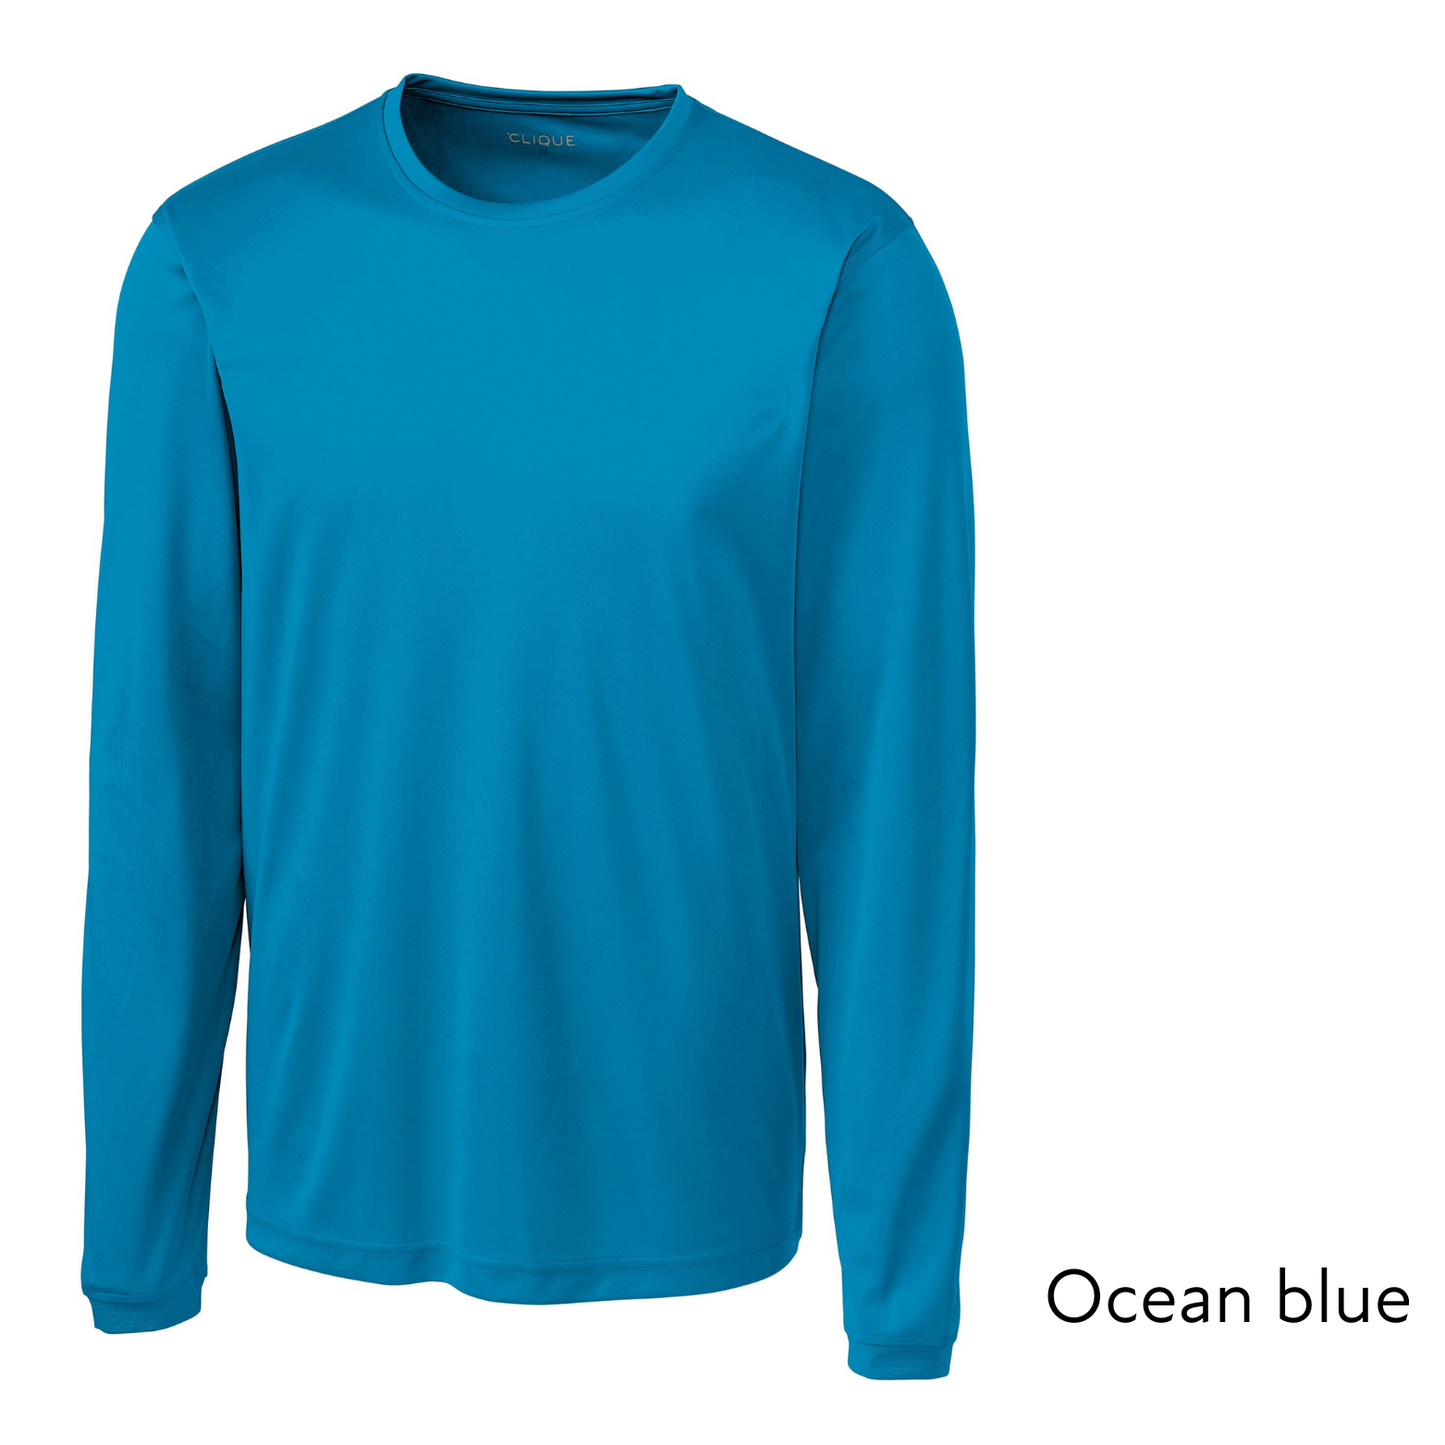 (Catalogue hommes/sport) Longsleeve Clique Spin Eco Performance